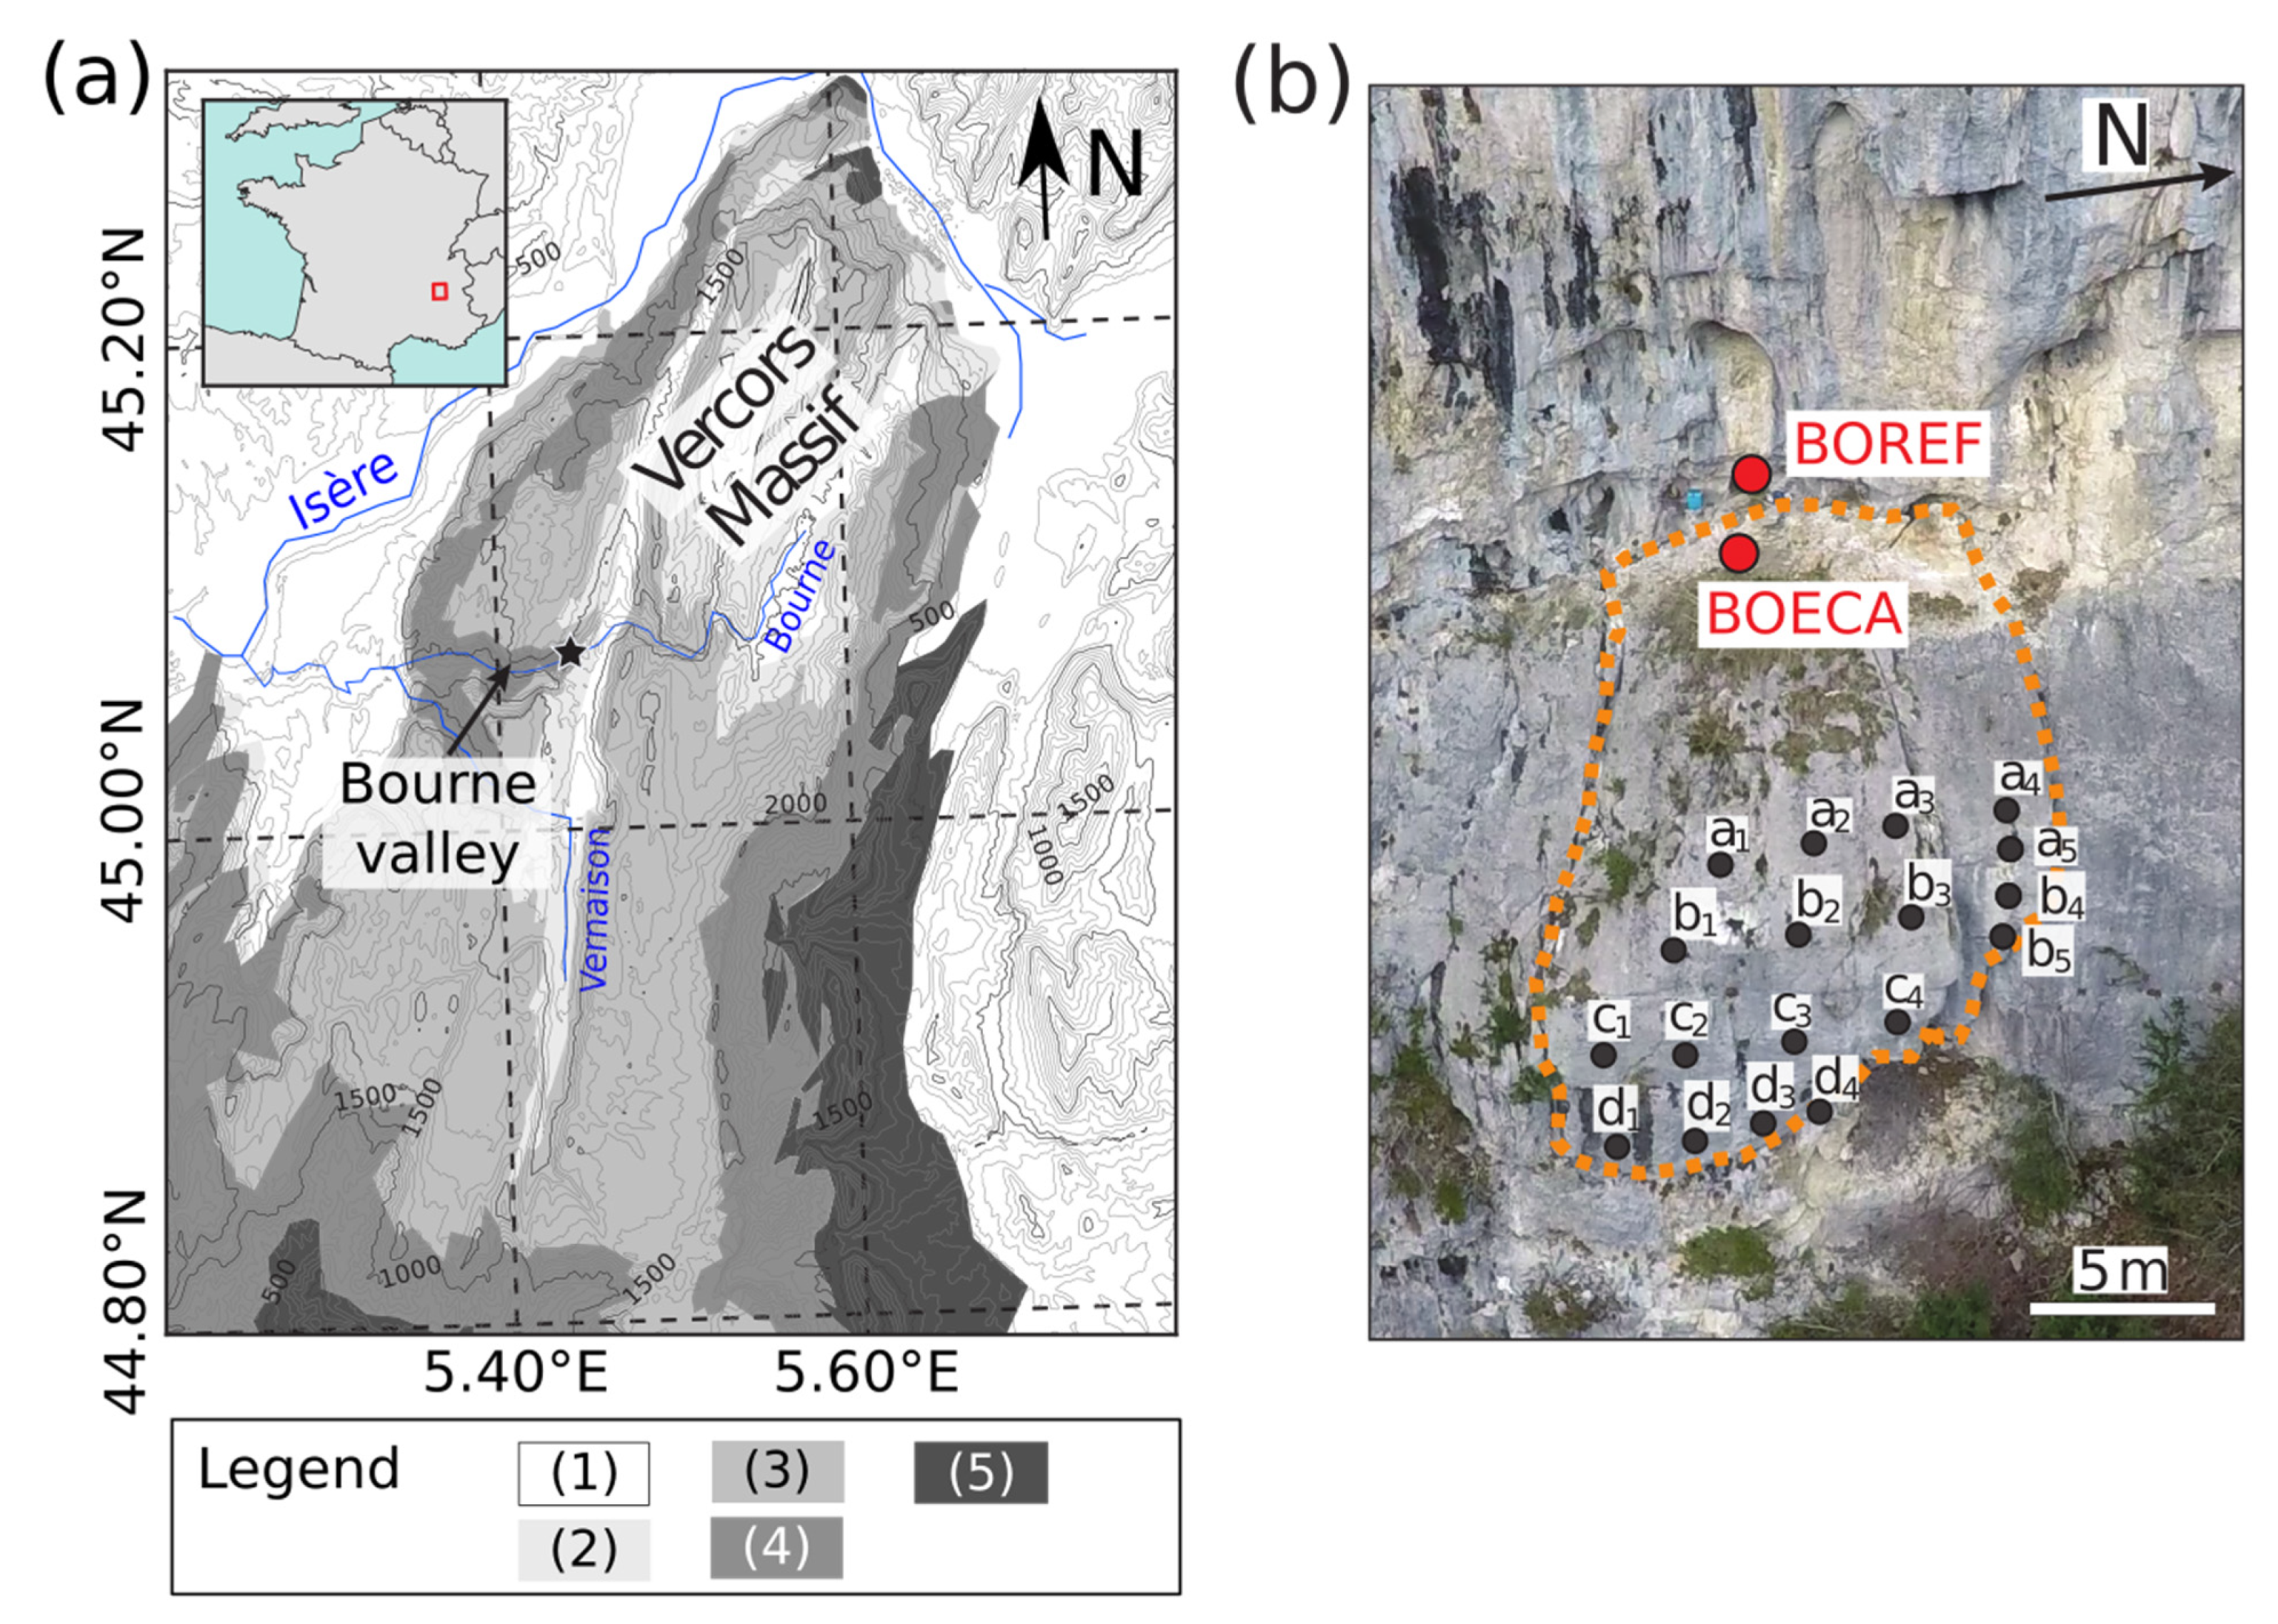 Geosciences | Free Full-Text | Toward Workable and Cost-Efficient  Monitoring of Unstable Rock Compartments with Ambient Noise | HTML